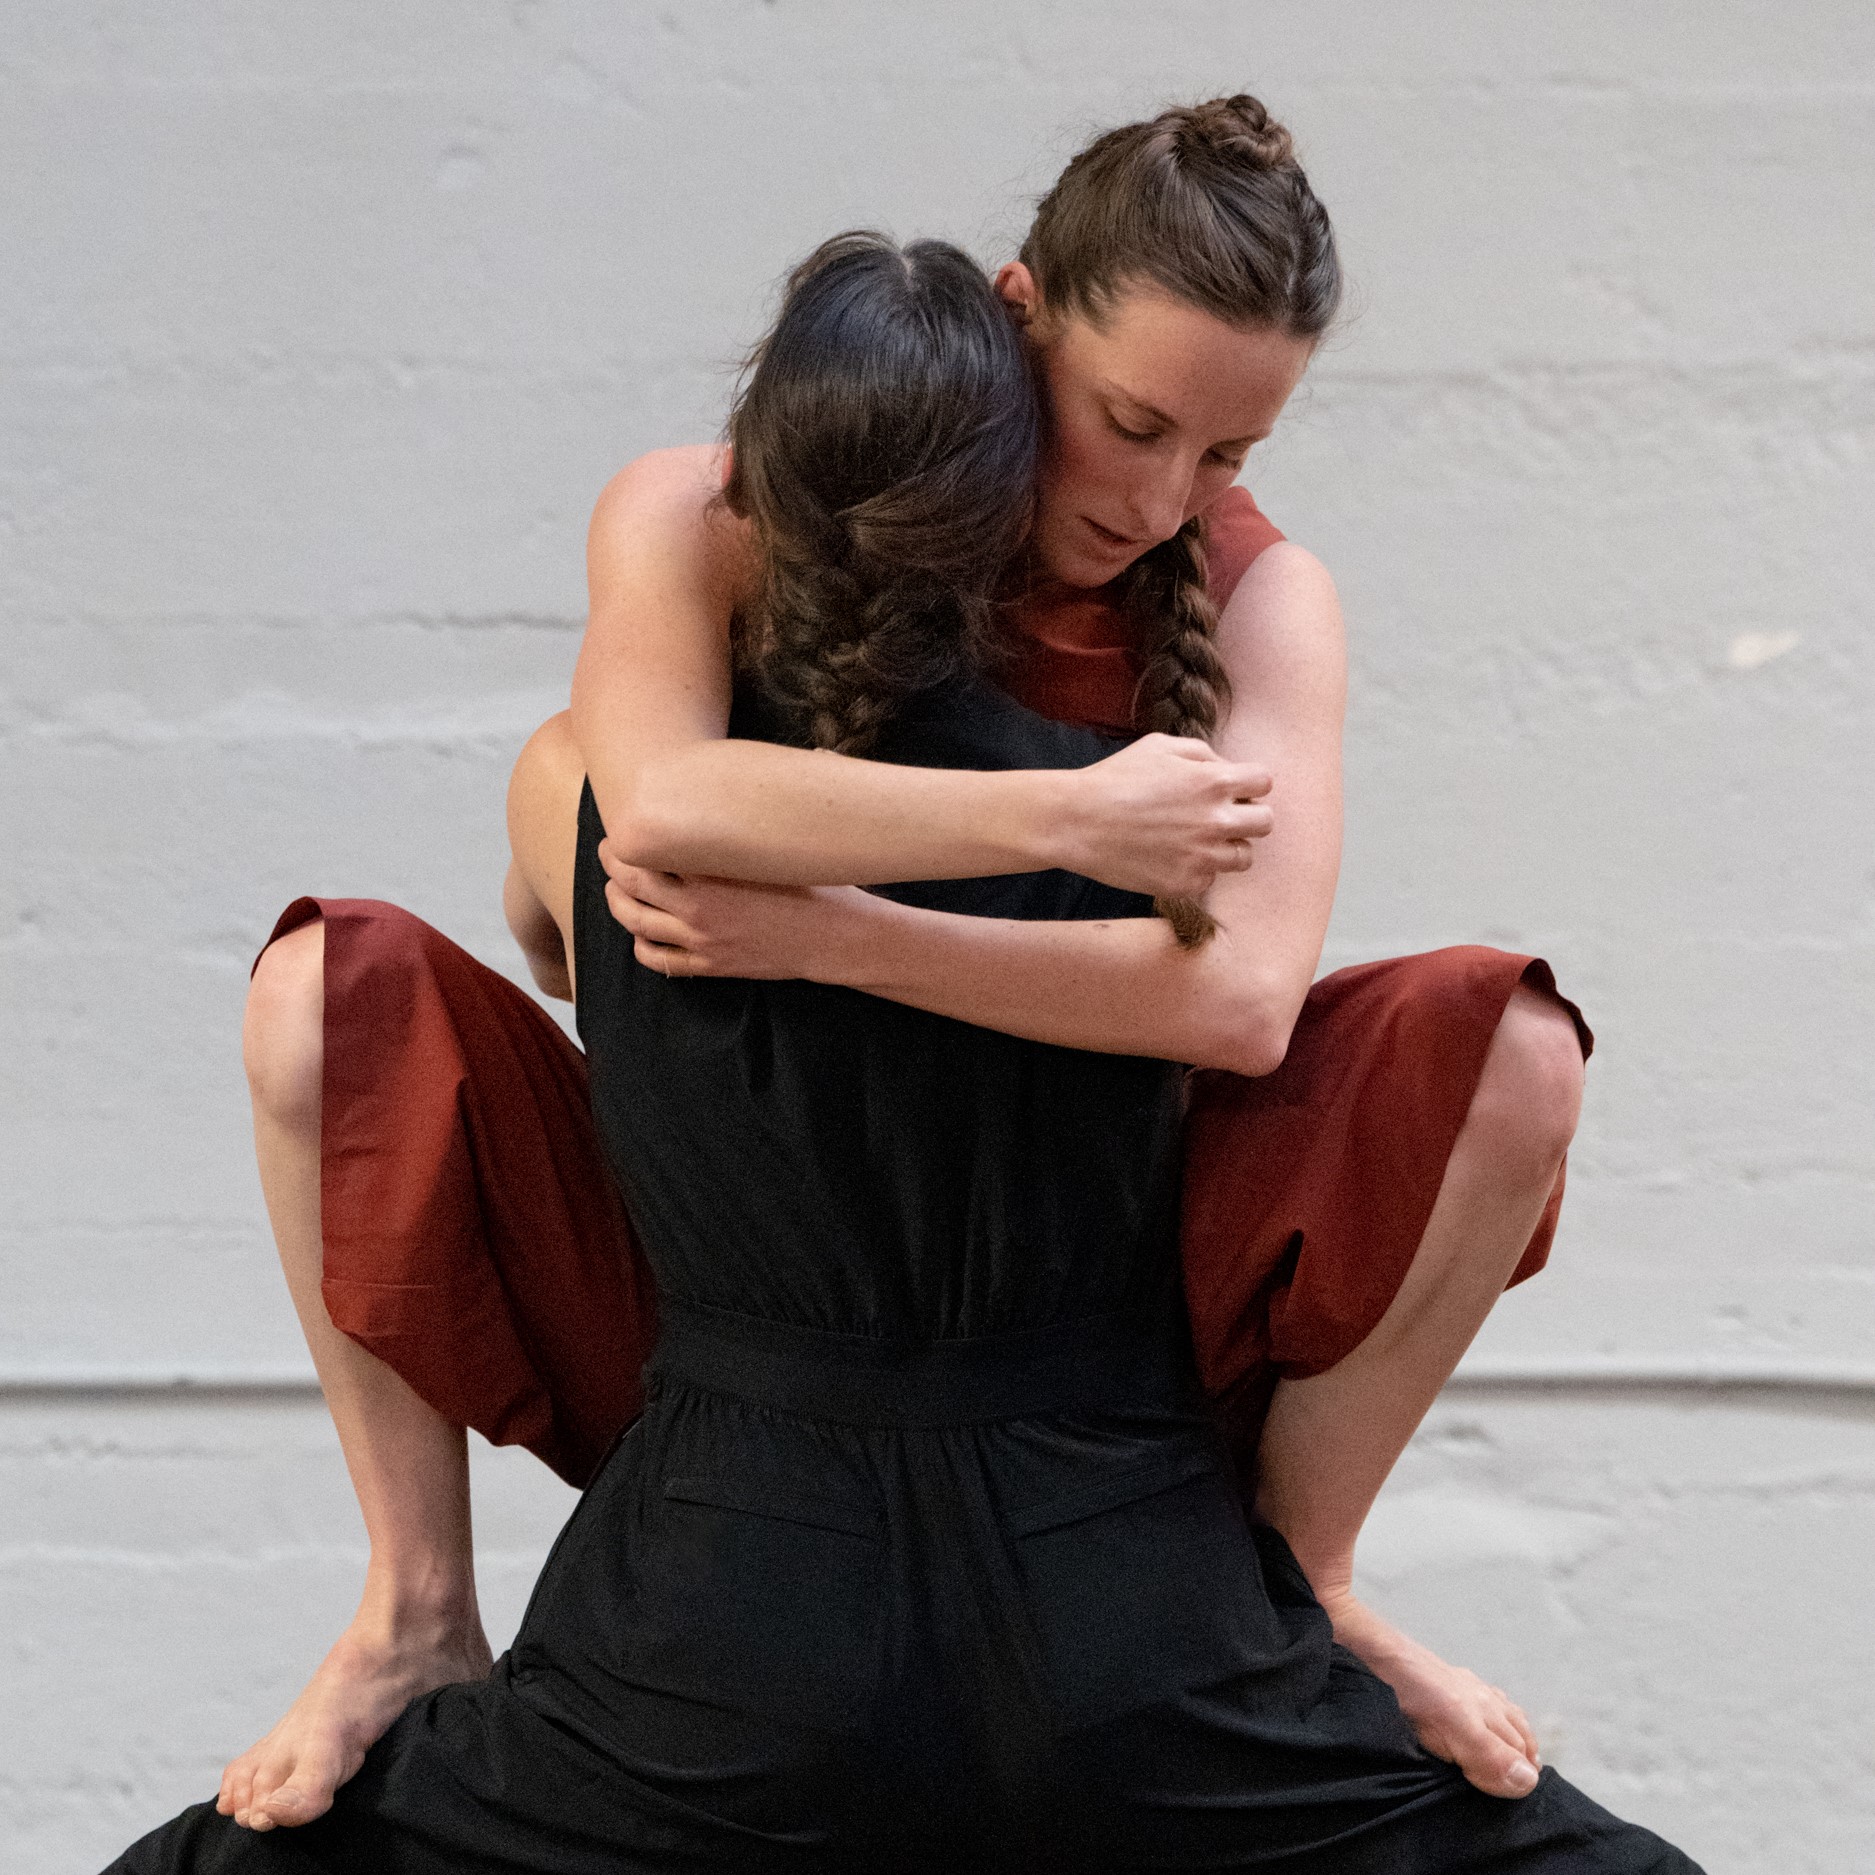 Two dancers with long braided hair perform in a space with white walls. One dancer is lifting another in a hug-like movement.